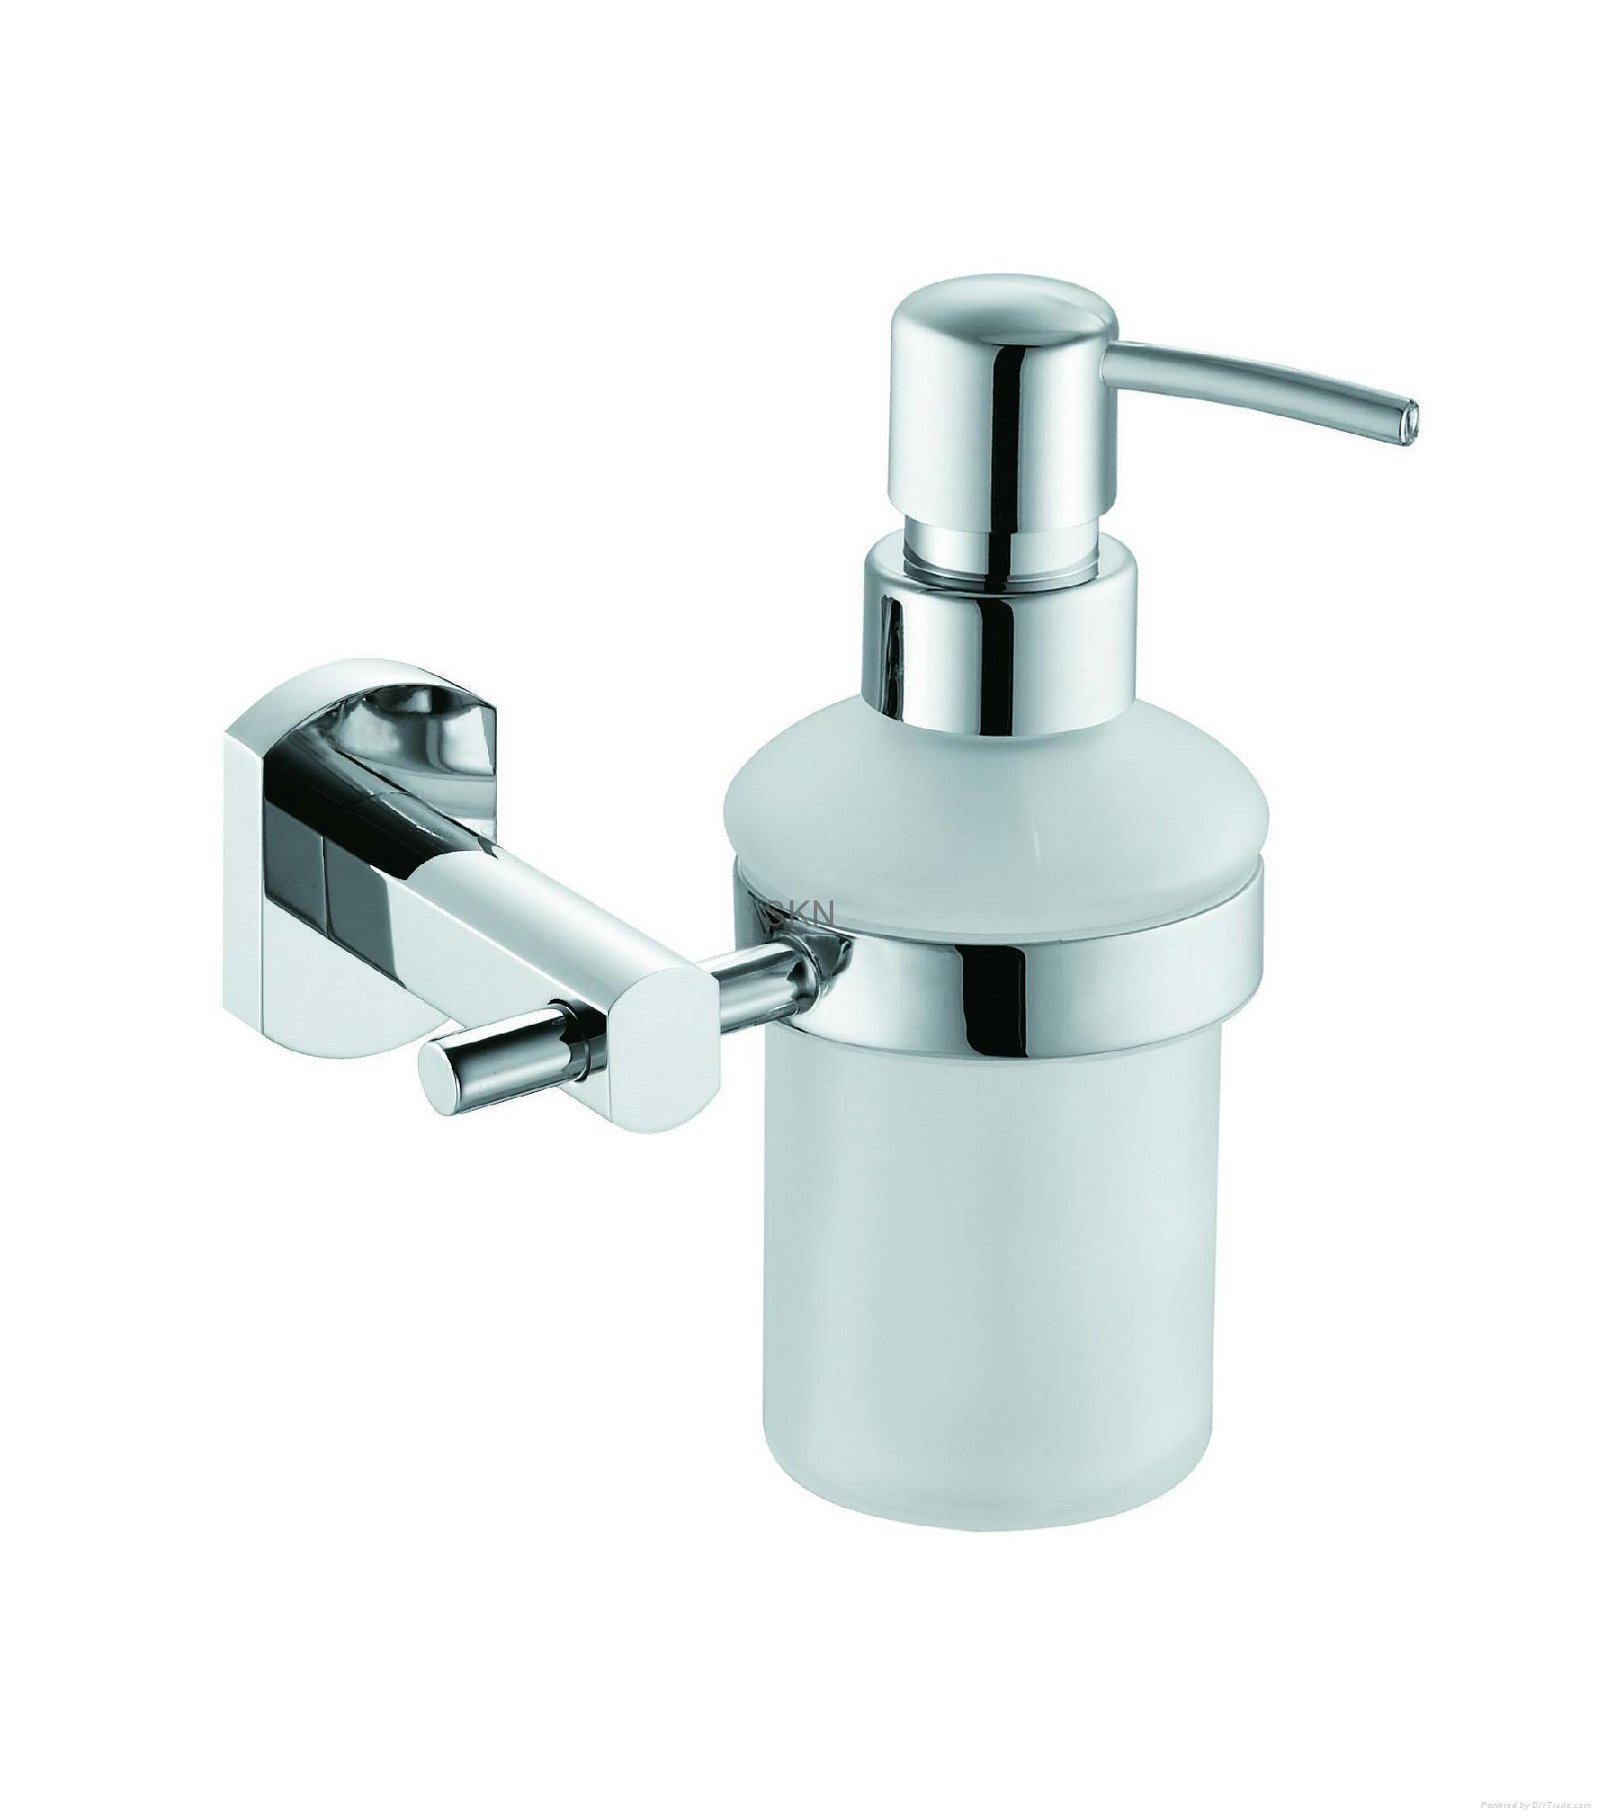 Bathroom accessories - Toilet roll holder with lid 4